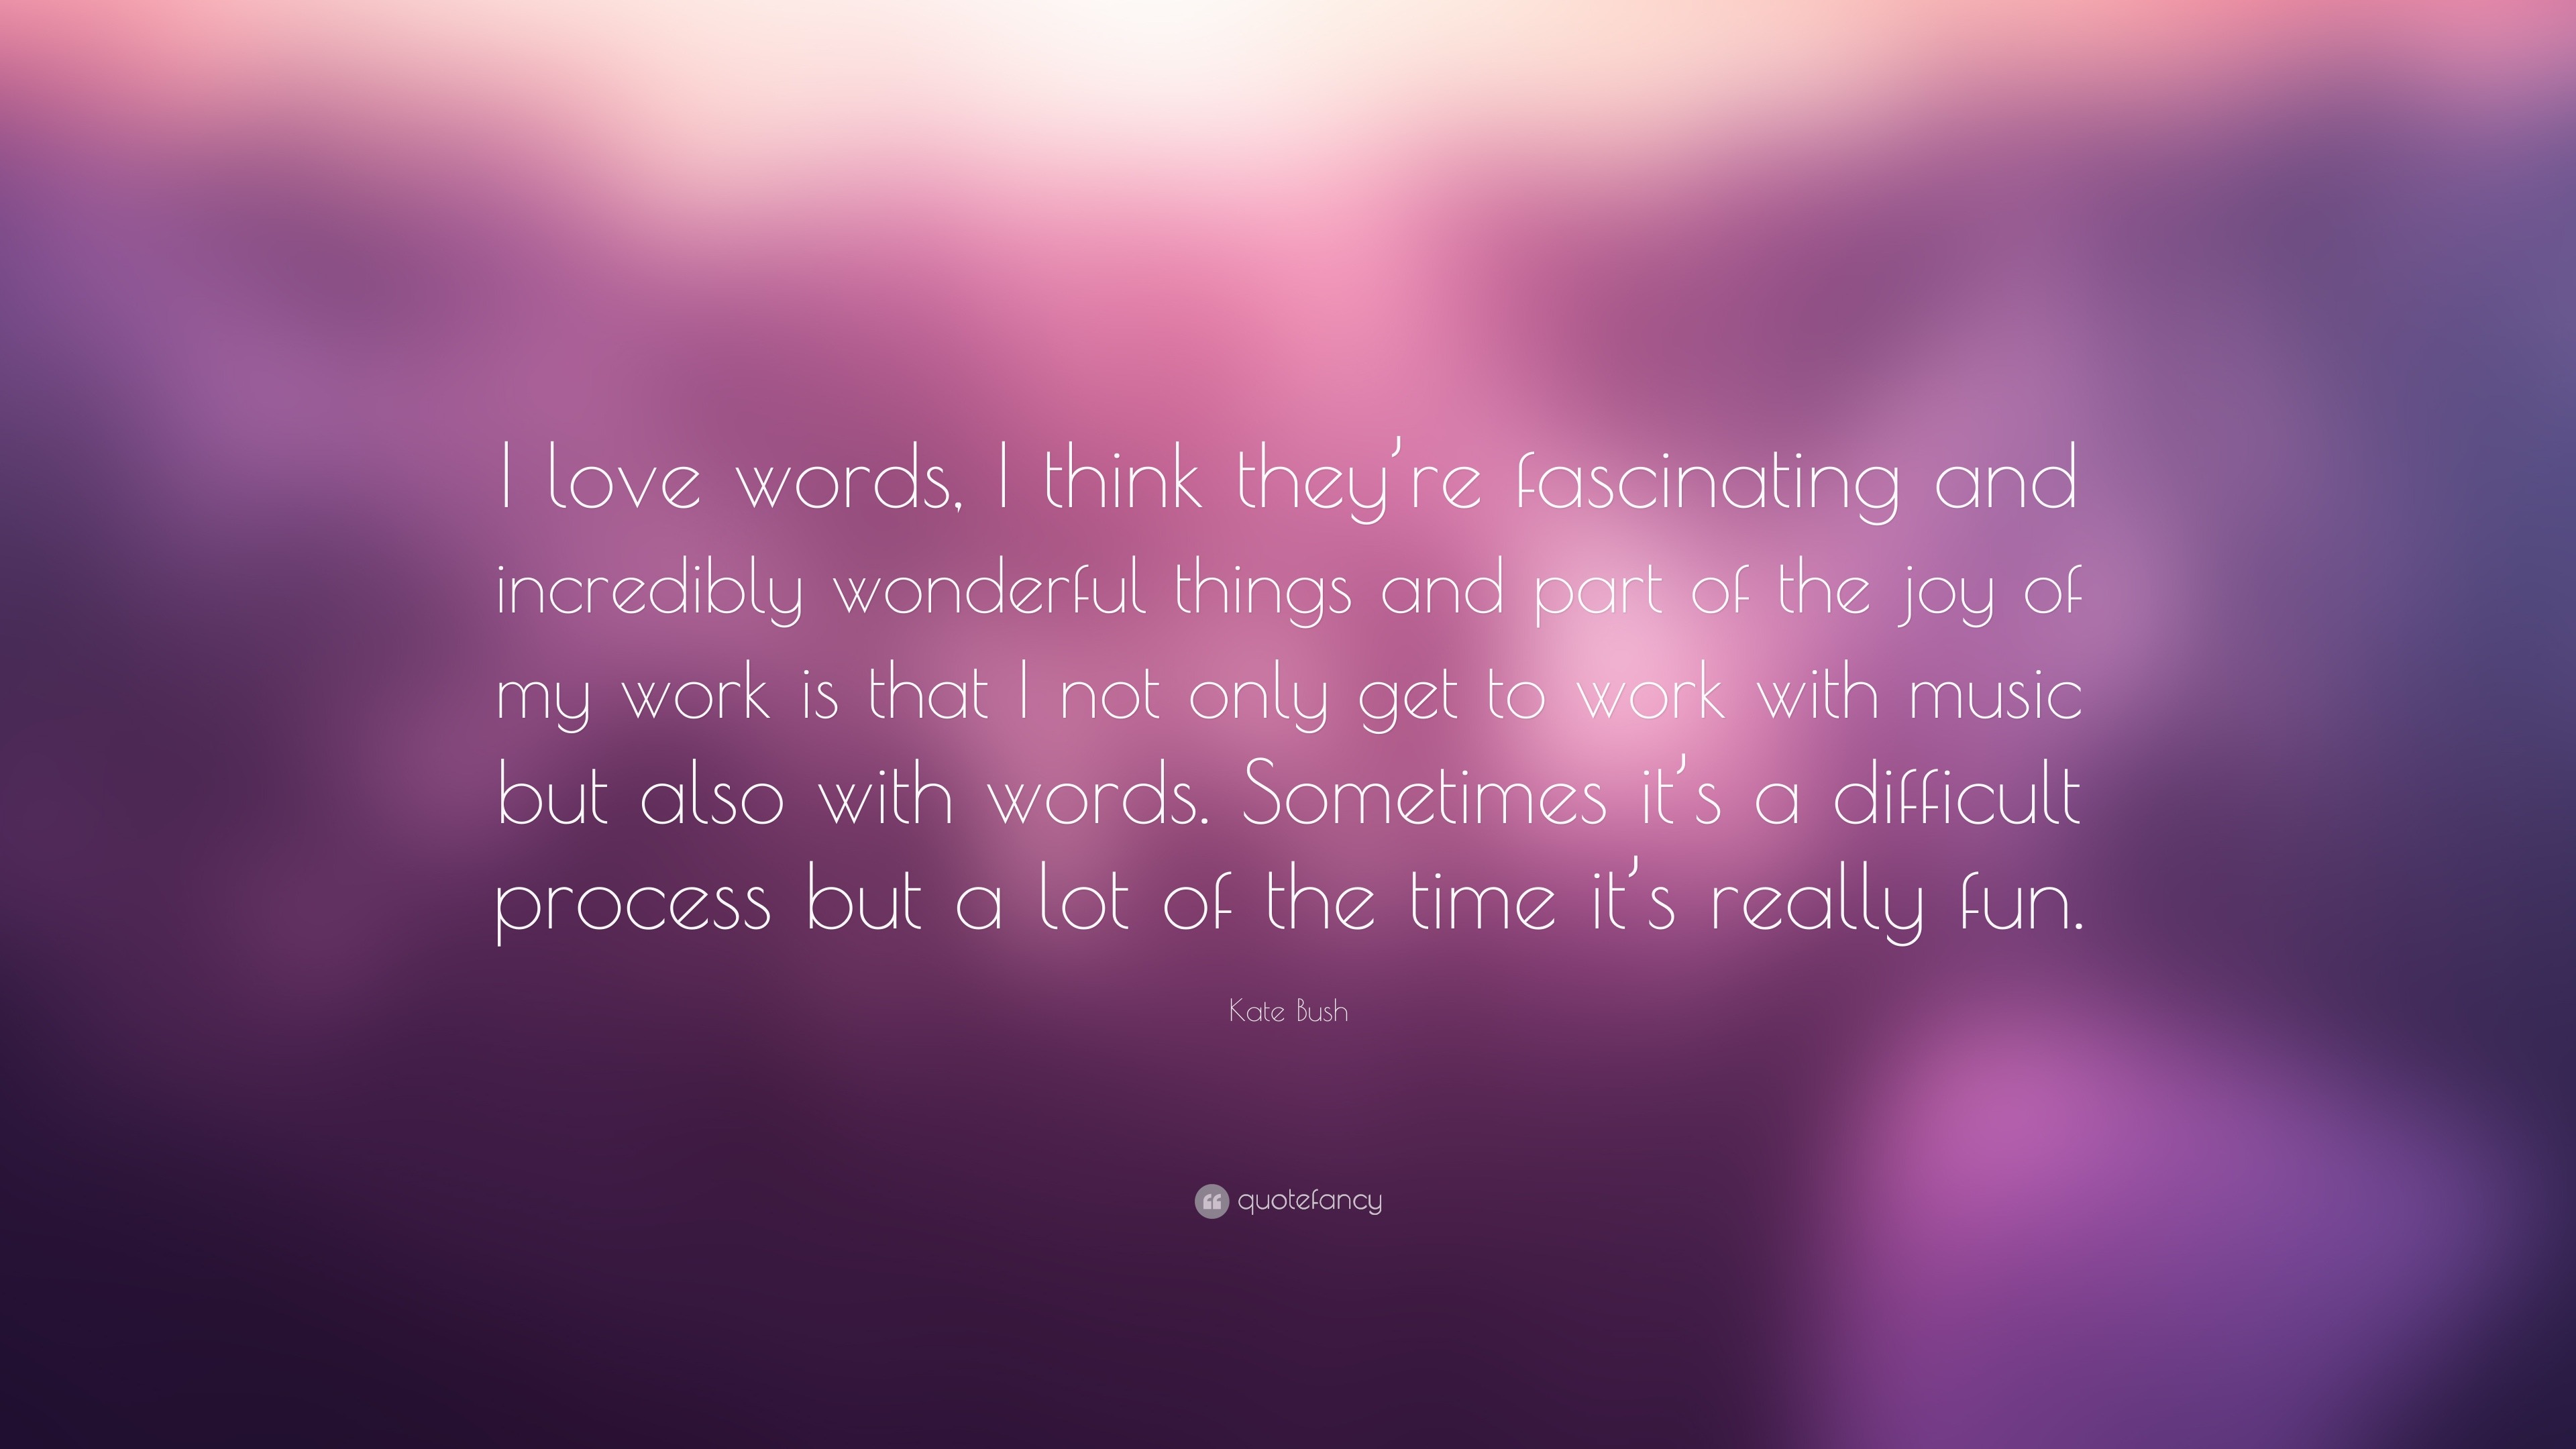 Kate Bush Quote: “I love words, I think they’re fascinating and ...